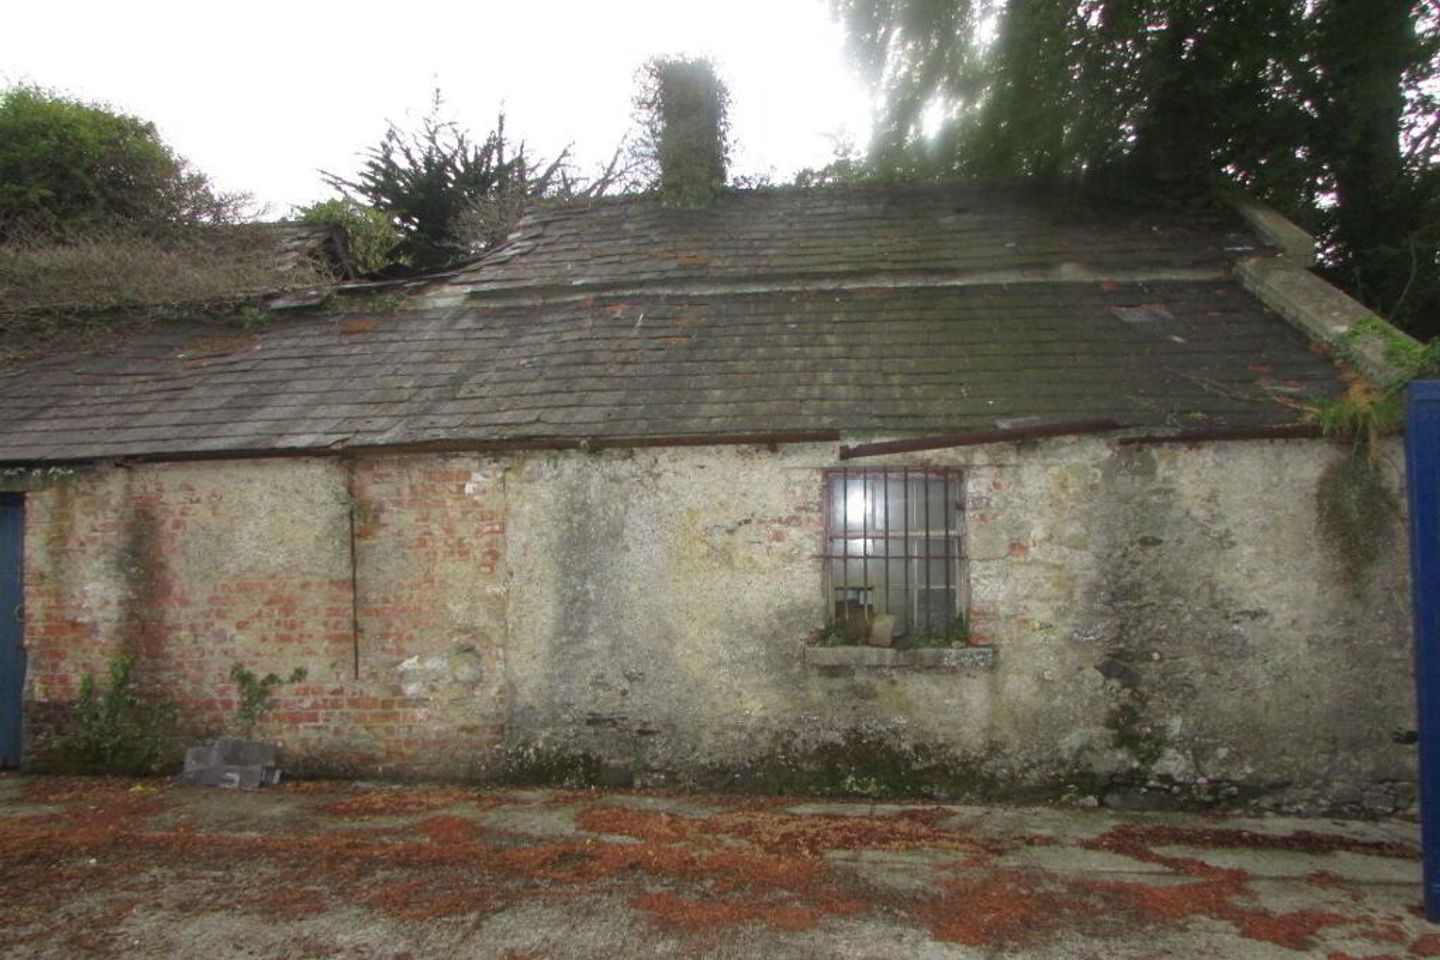 Rent Collectors Cottage, Ivy Lane, Carrickmacross, Co. Monaghan